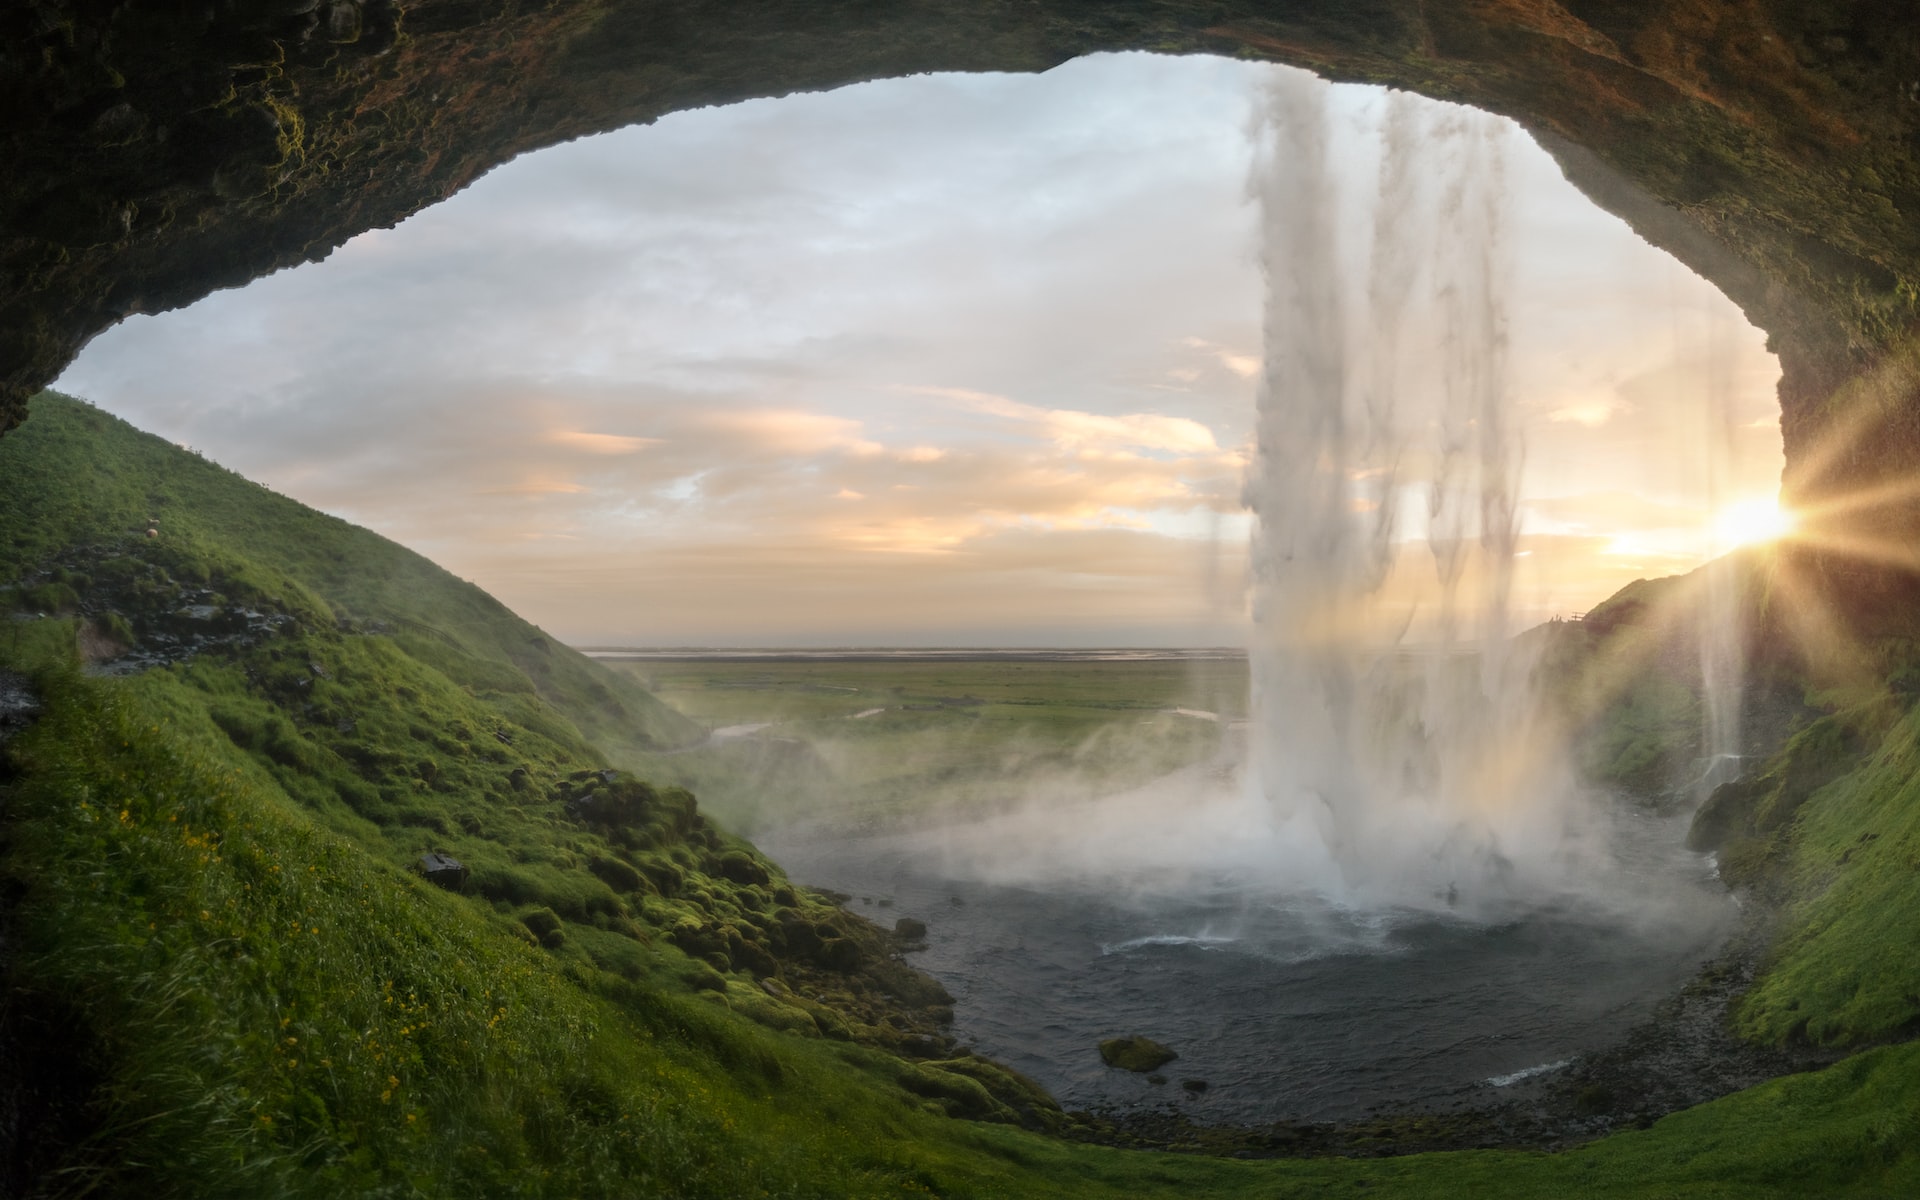 Magical nature travel destination in Iceland, the Seljalandfoss Waterfall
